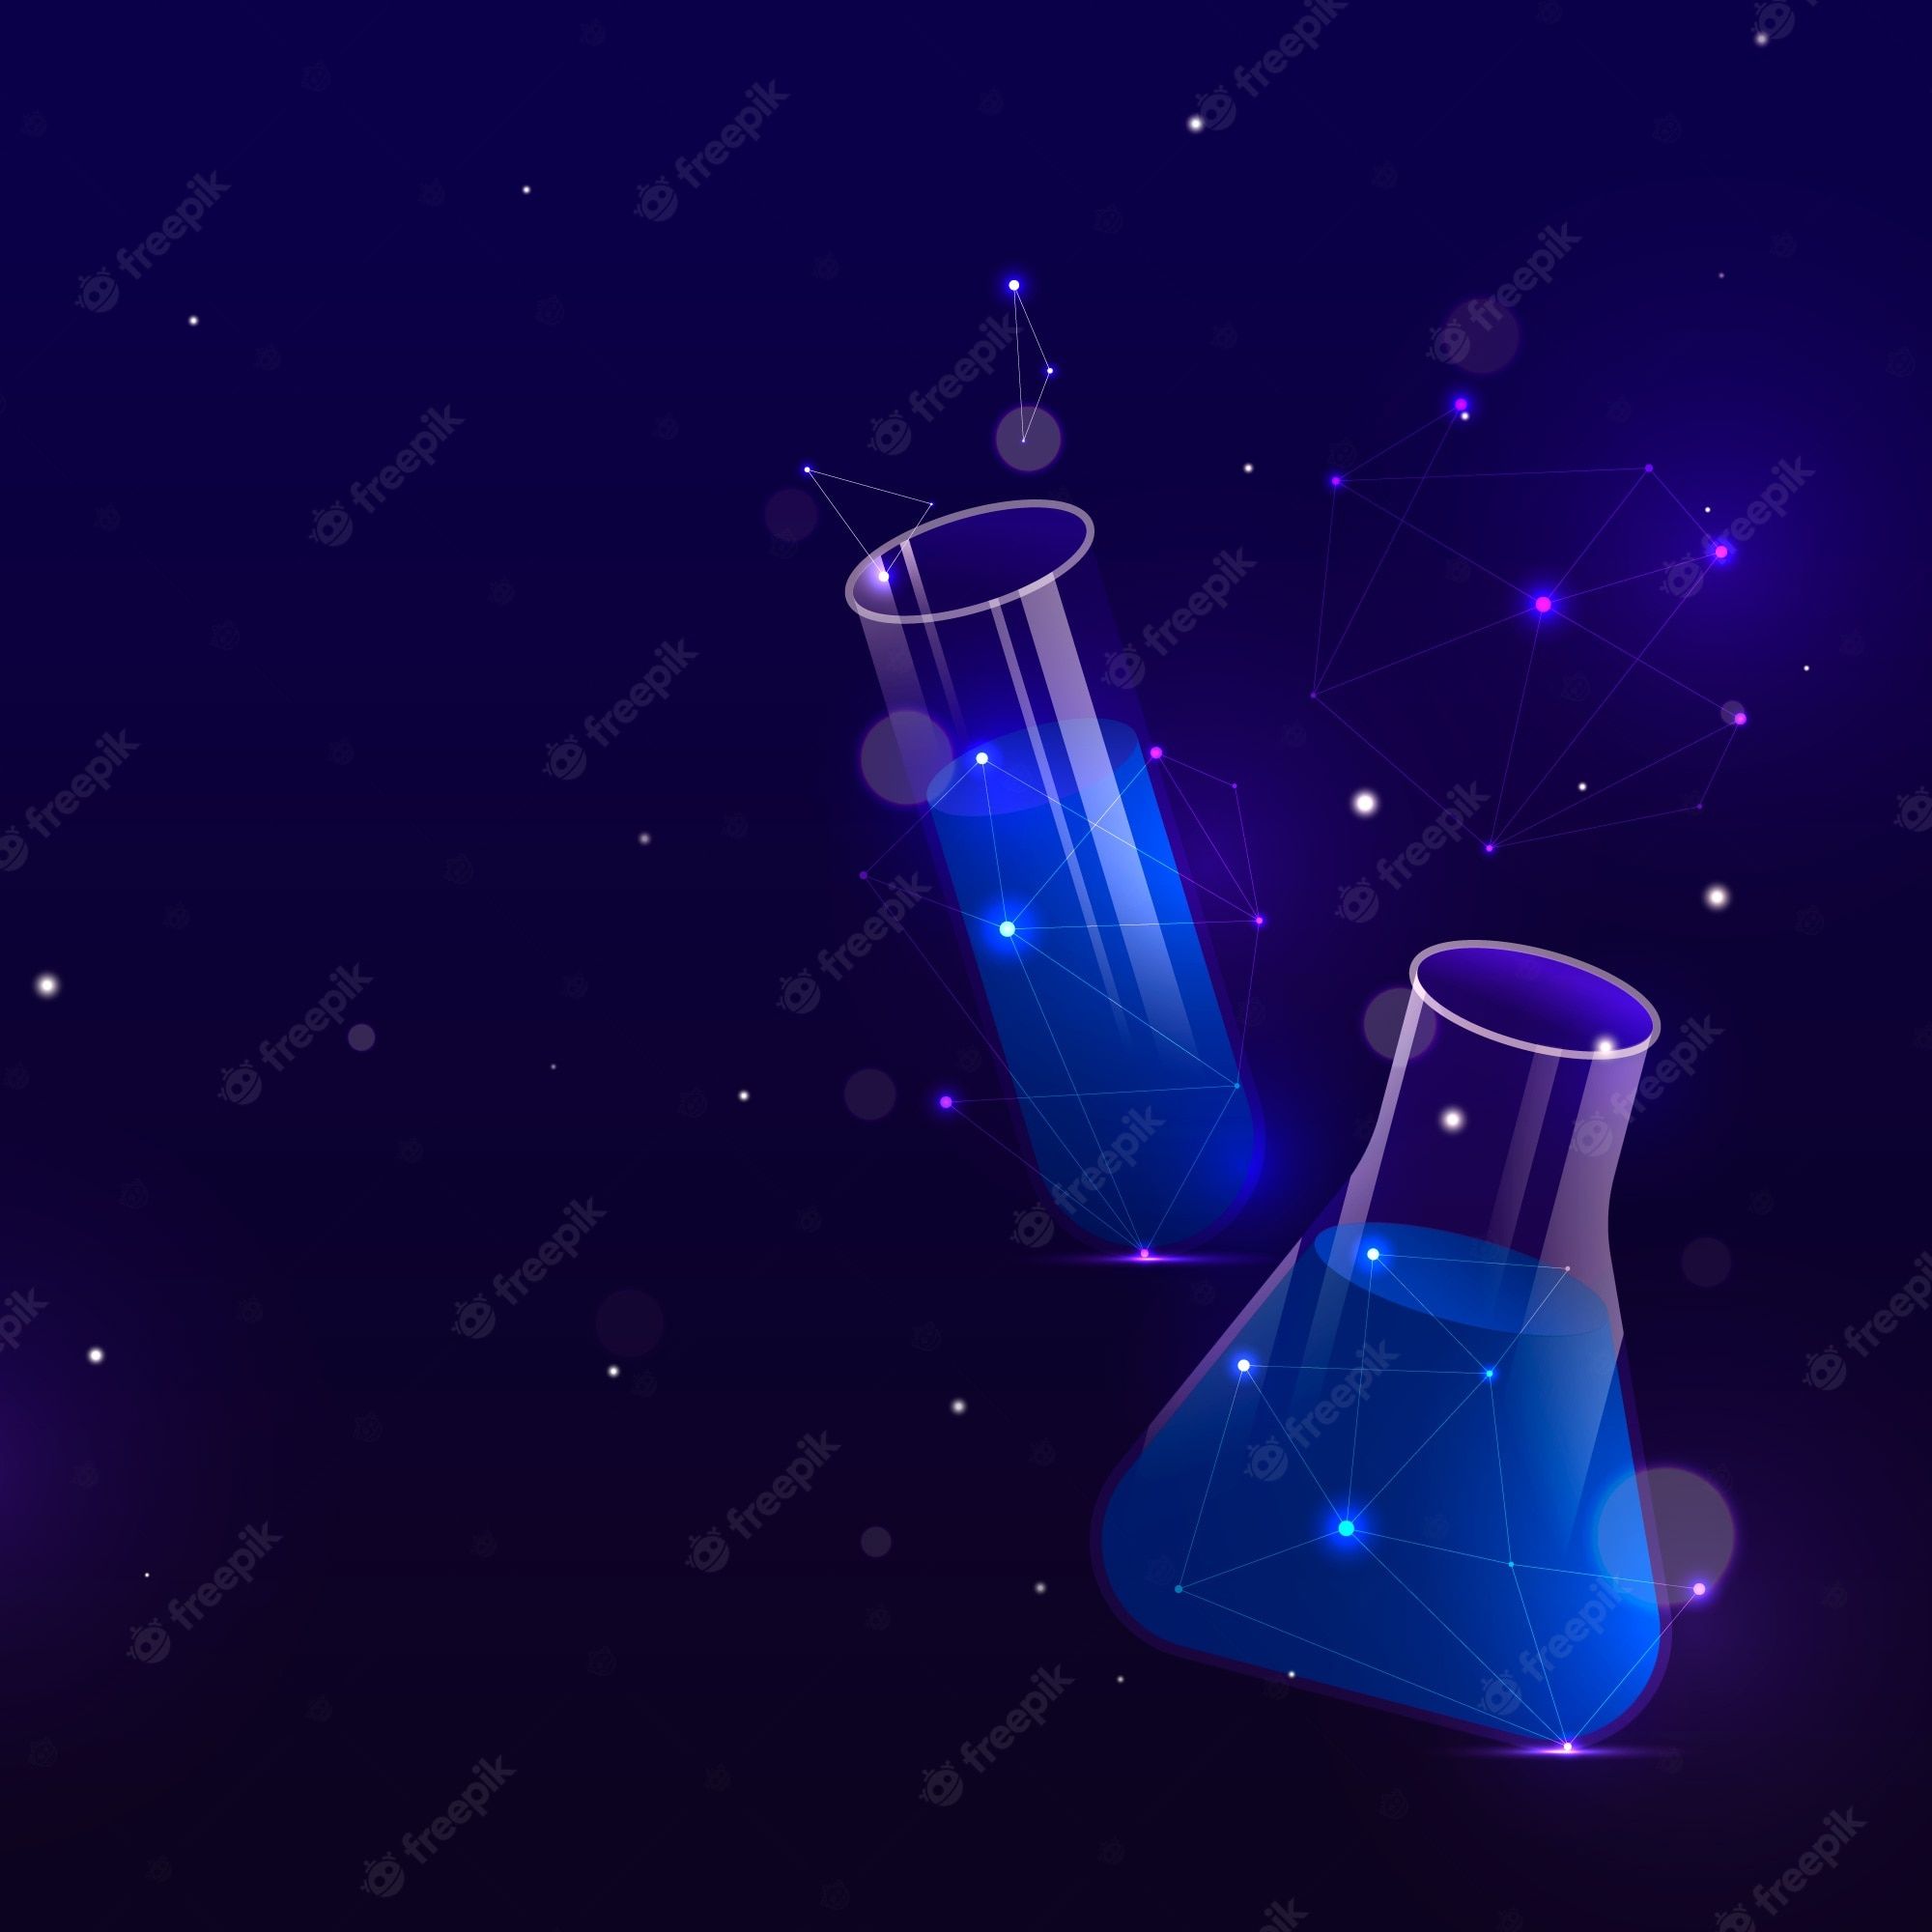 Science and technology concept, low poly style, chemical test tube on a dark background with stars. - Chemistry